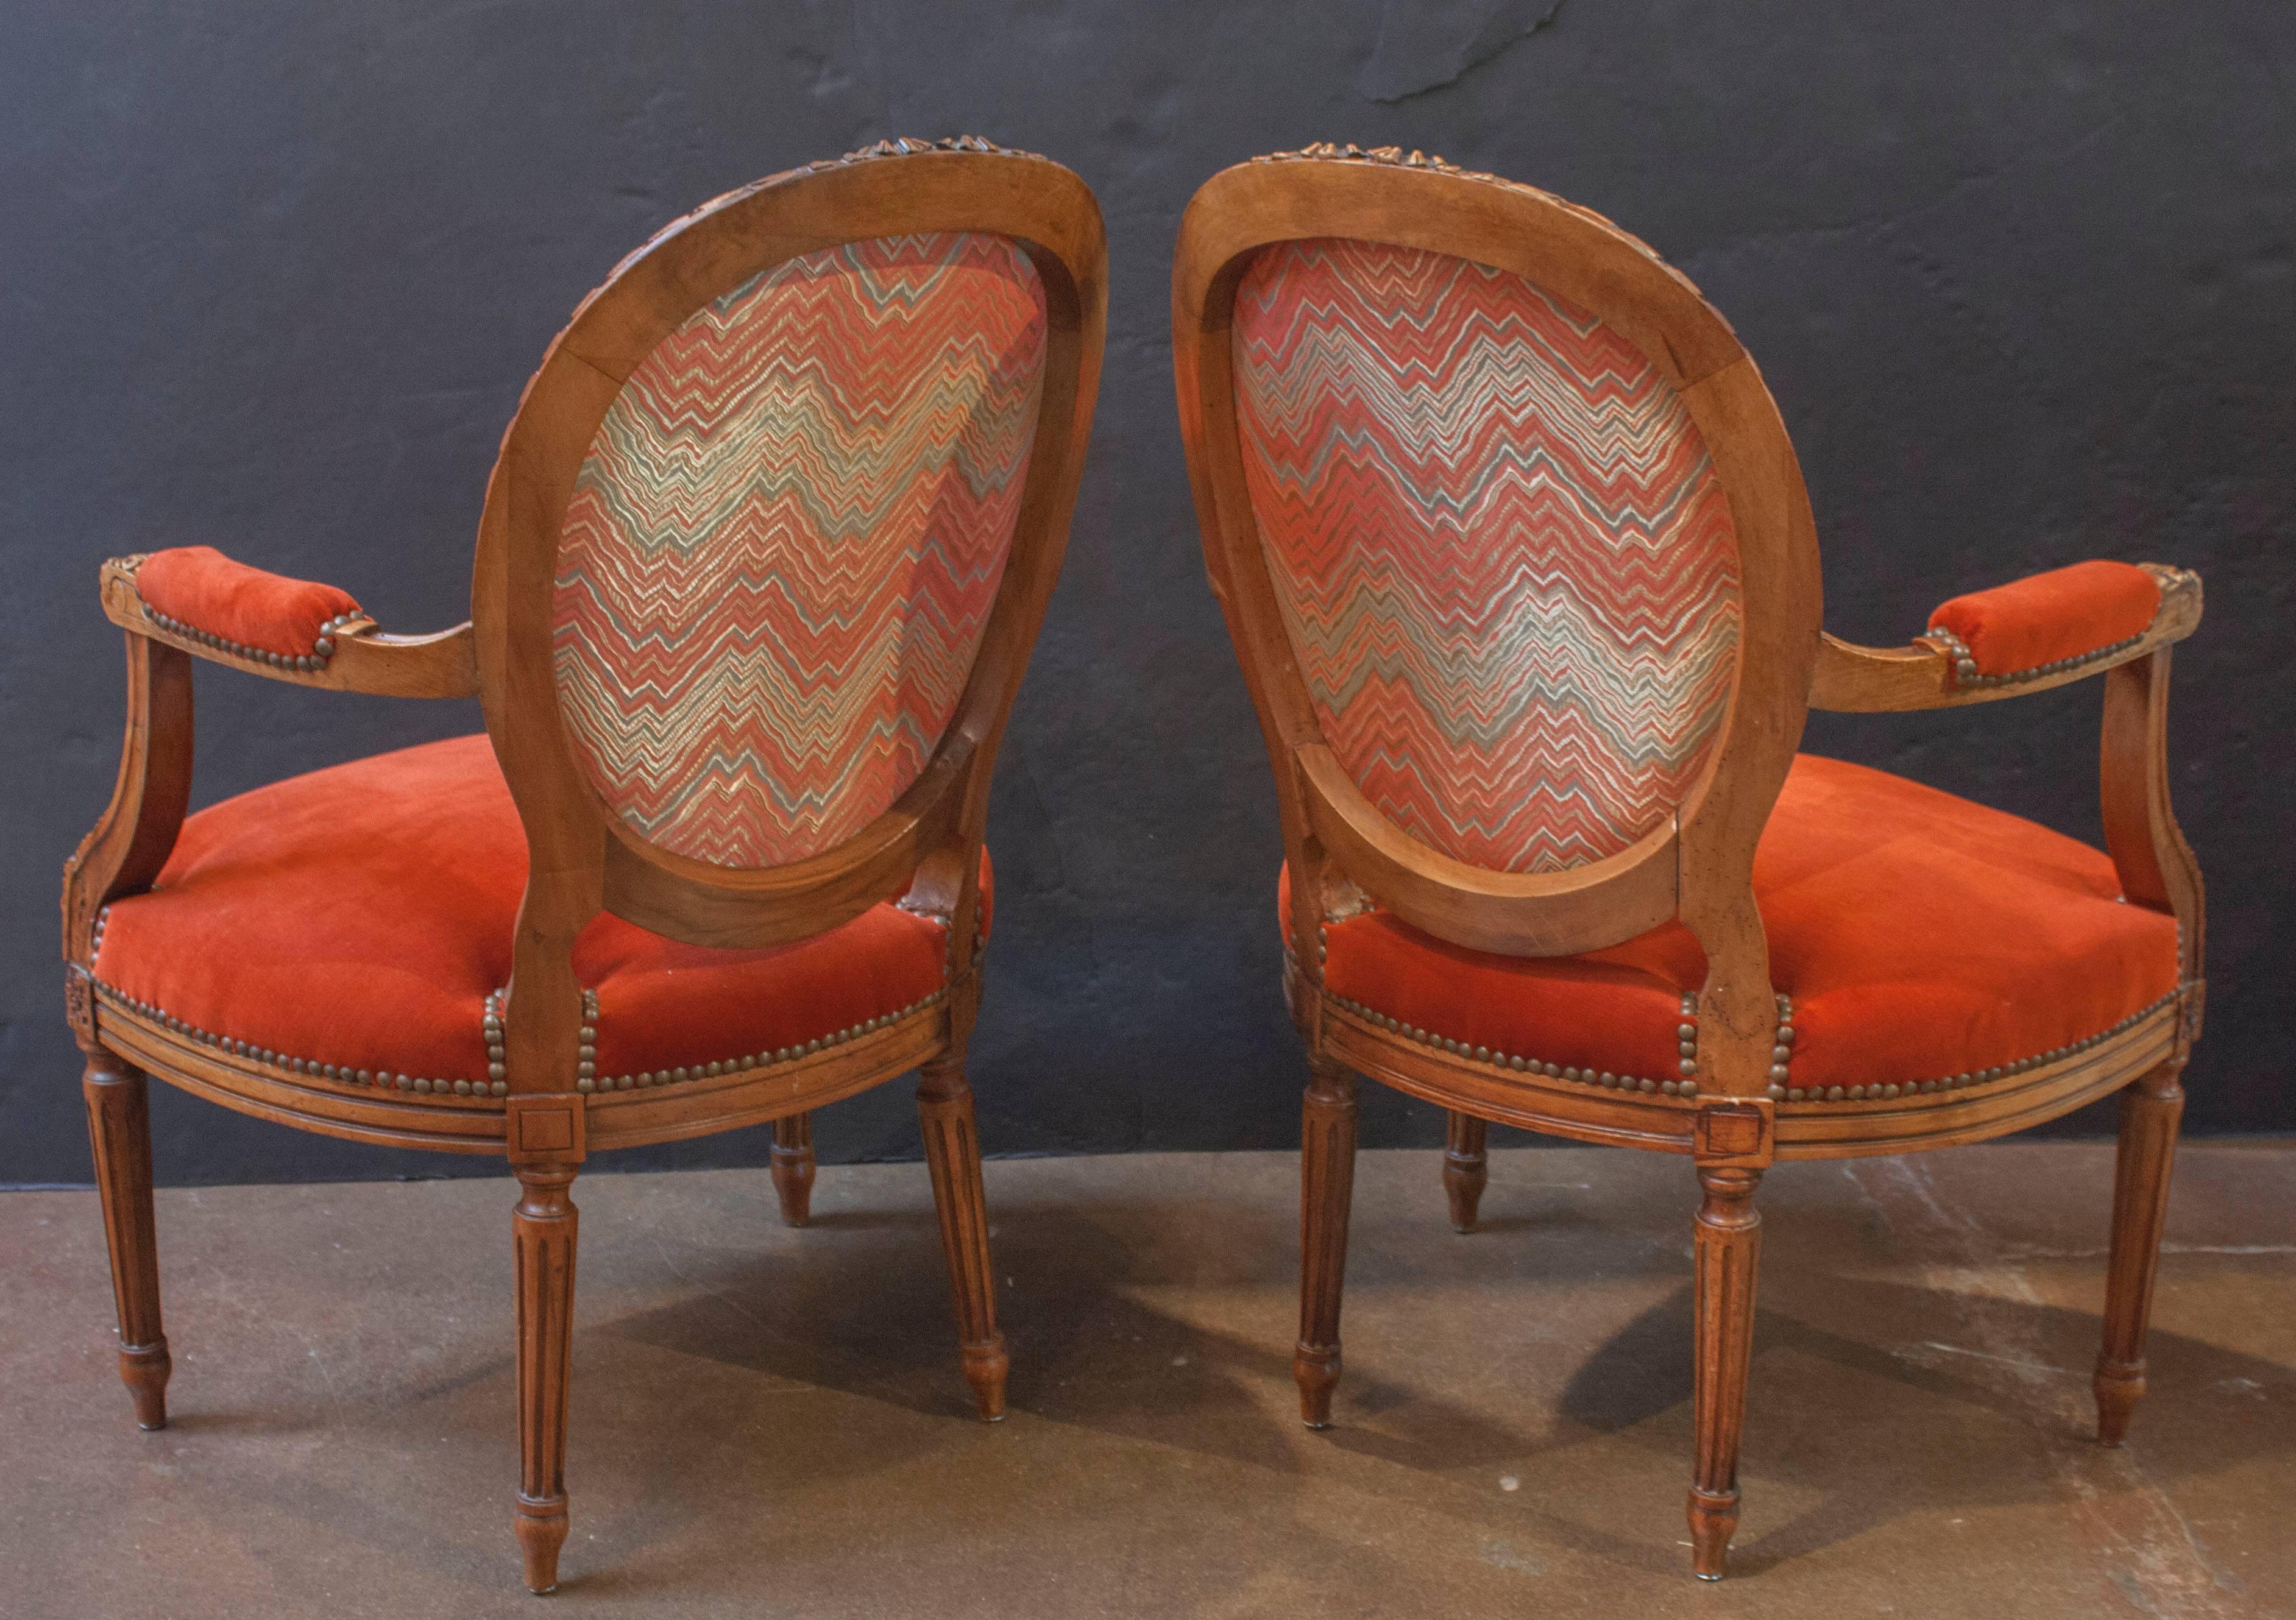 Dating to circa 1900, and carved in the Louis XVI style, this pair of charming armchairs feature the traditional medallion shaped back, giving way to graceful and sweeping open arms, a generous rounded seat, and neoclassical straight, fluted legs.